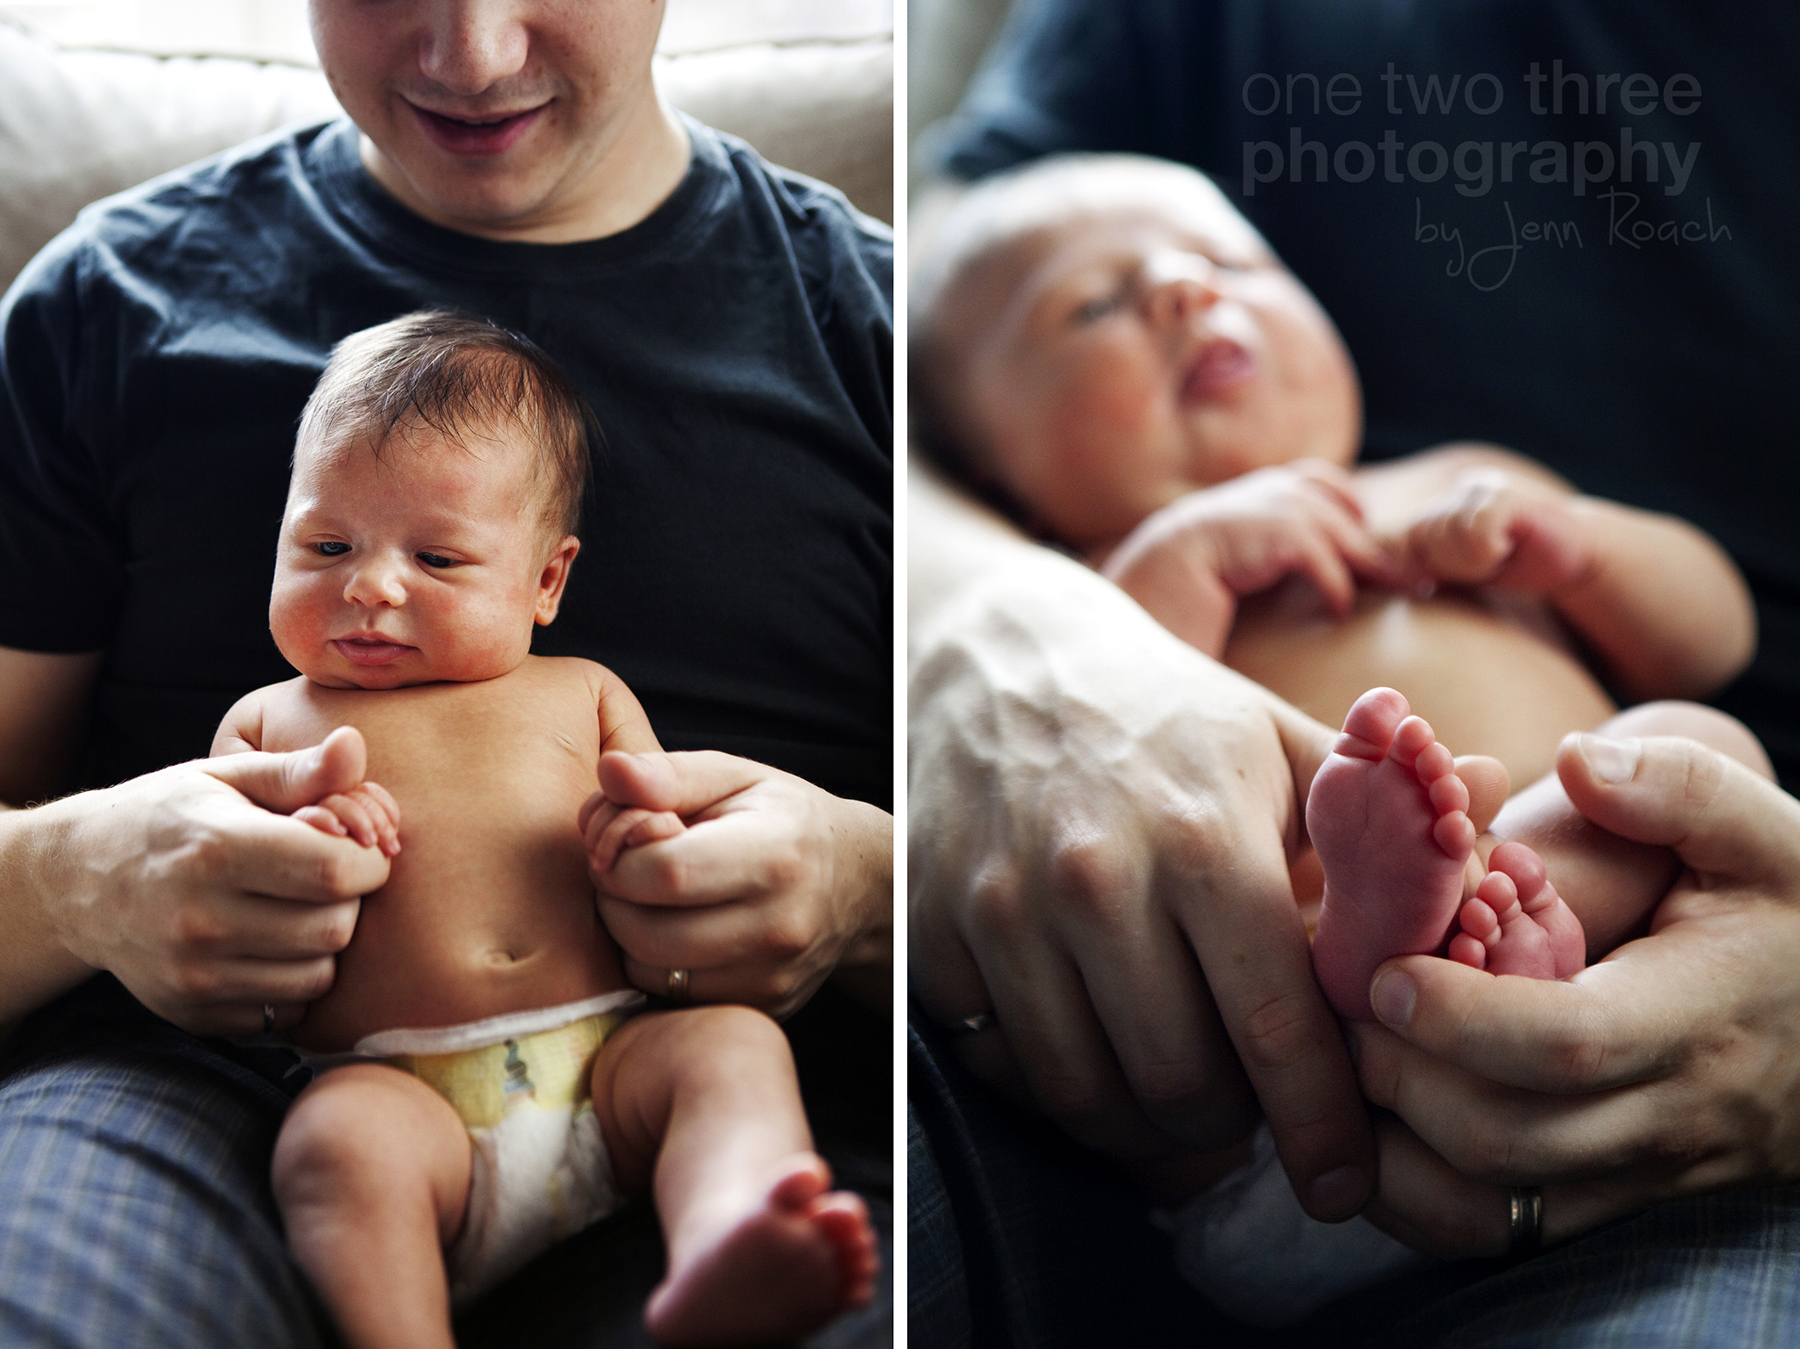 Andrew holds baby Leah during the natural and candid photography session